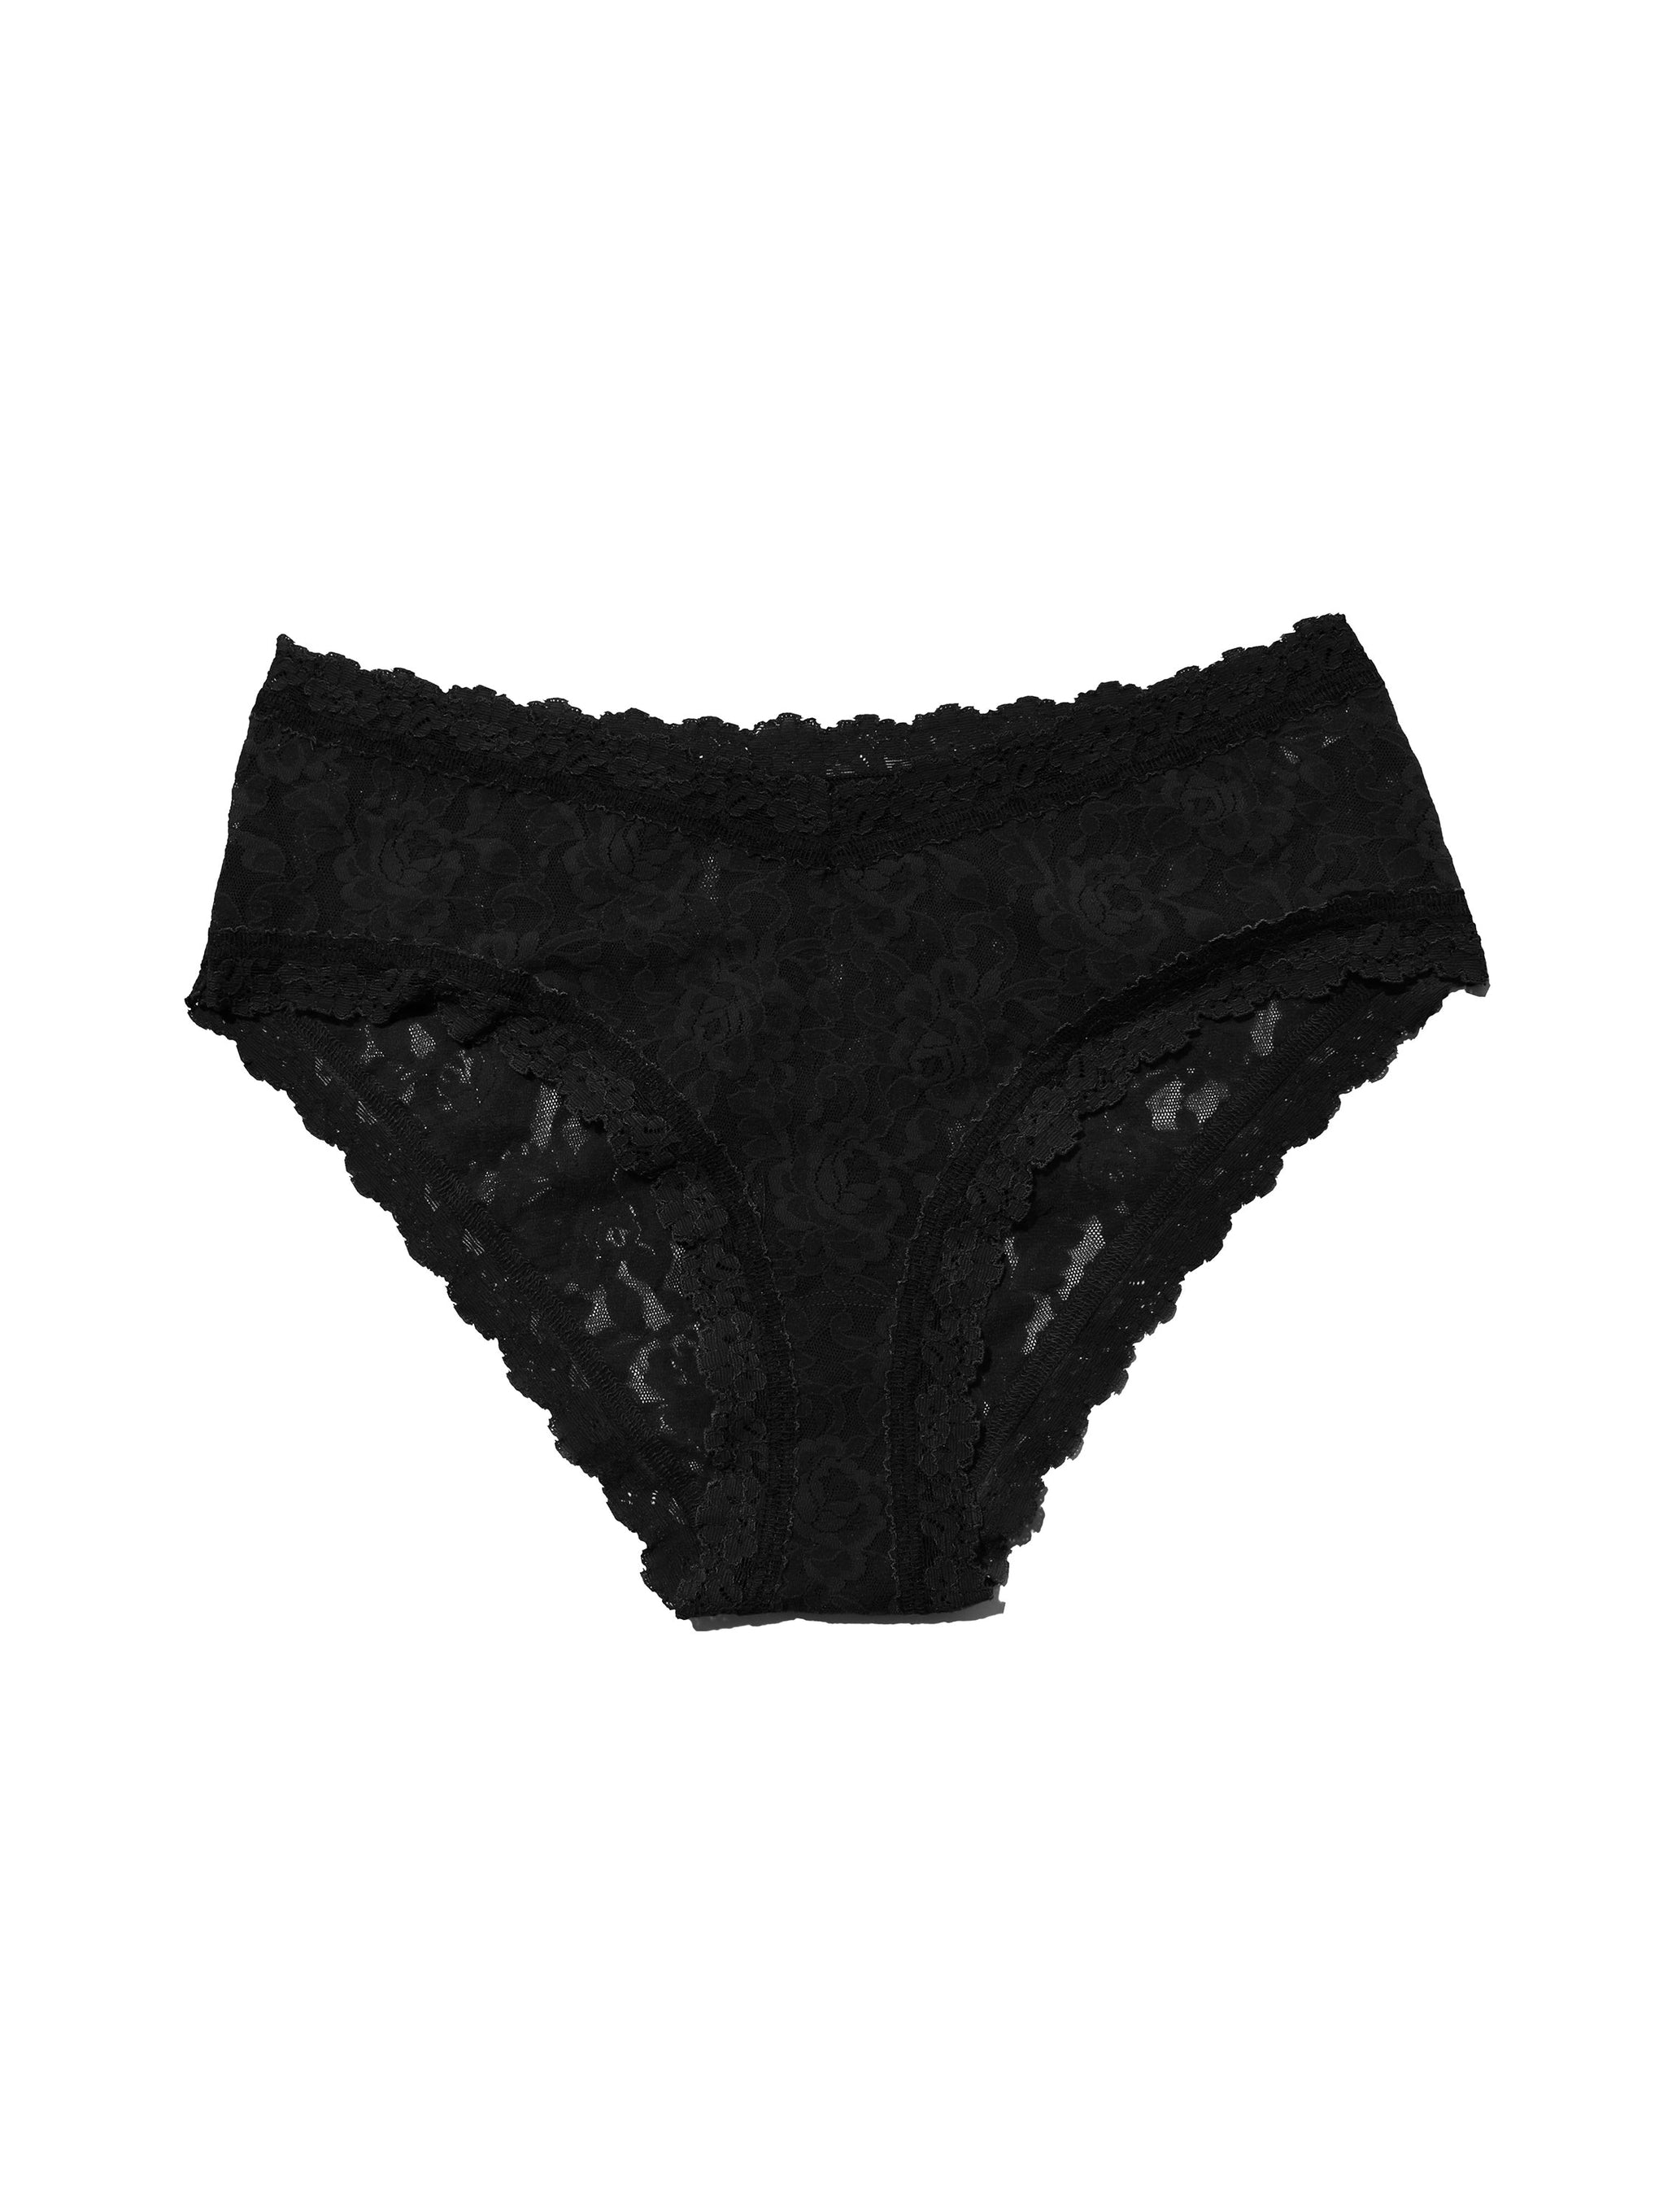 All-Over Lace Cheeky Panties, R Line